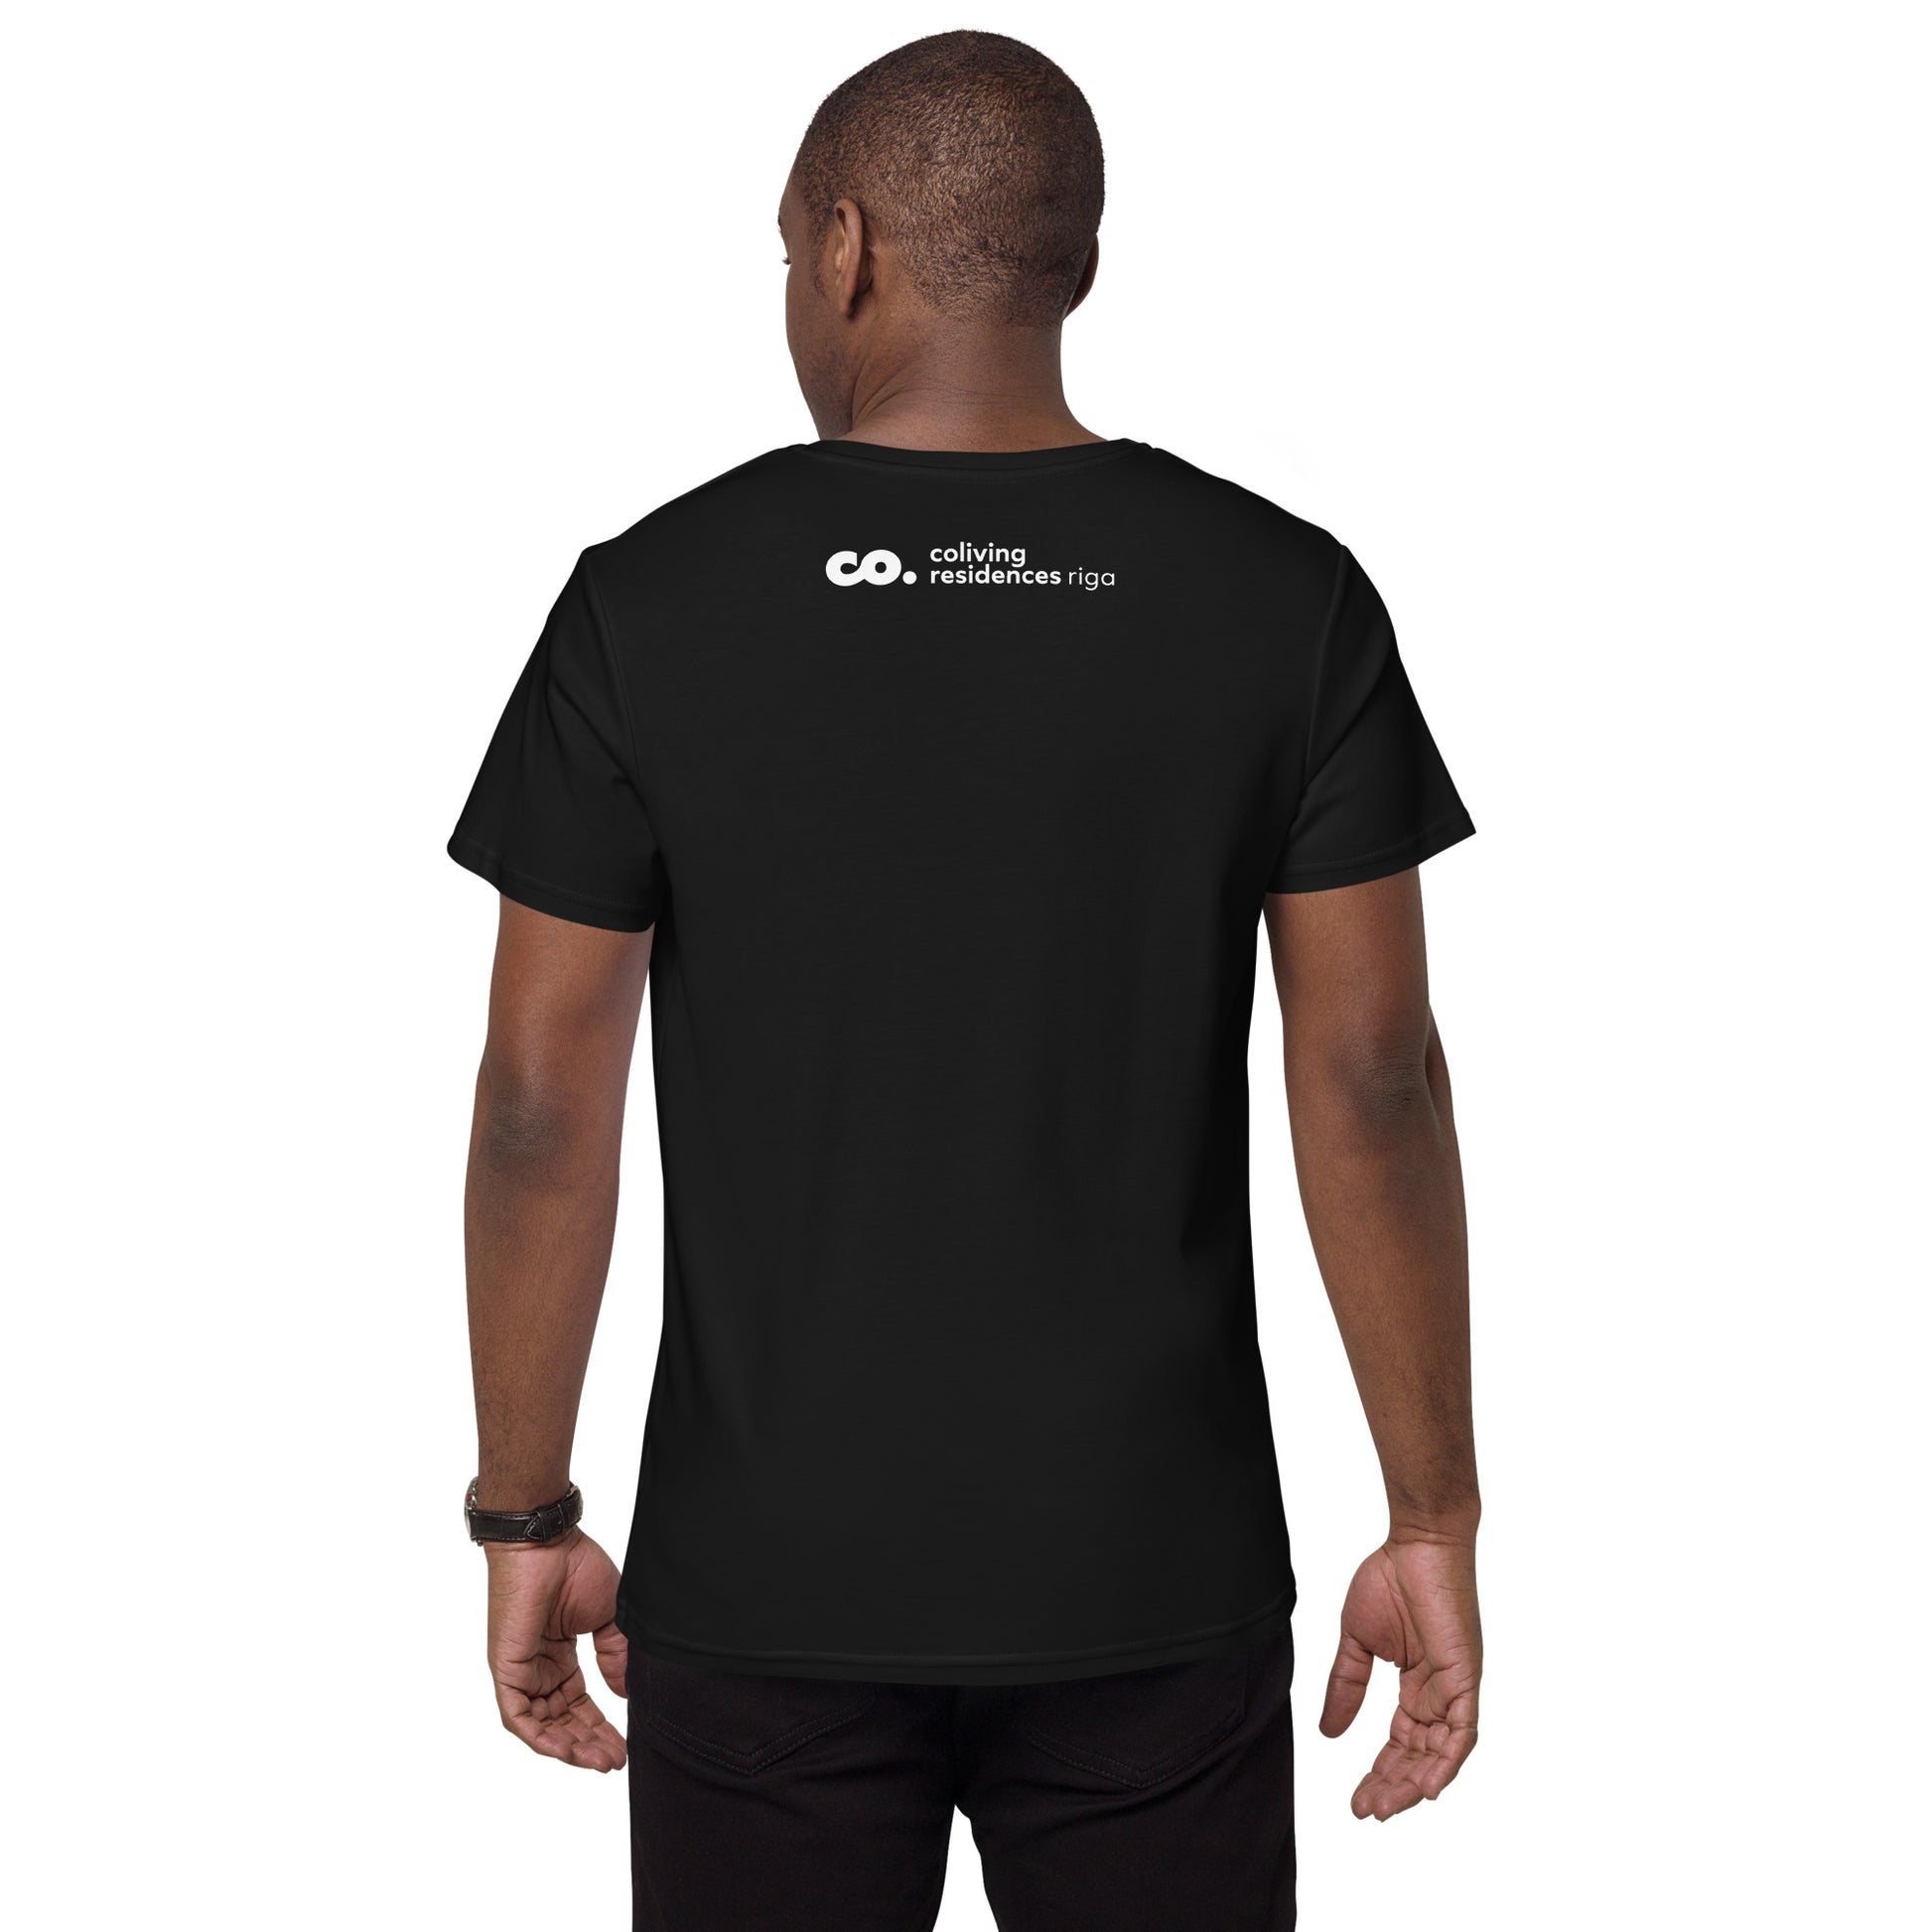 Back view of a Black man wearing a black t-shirt with a Coliving Residences logo